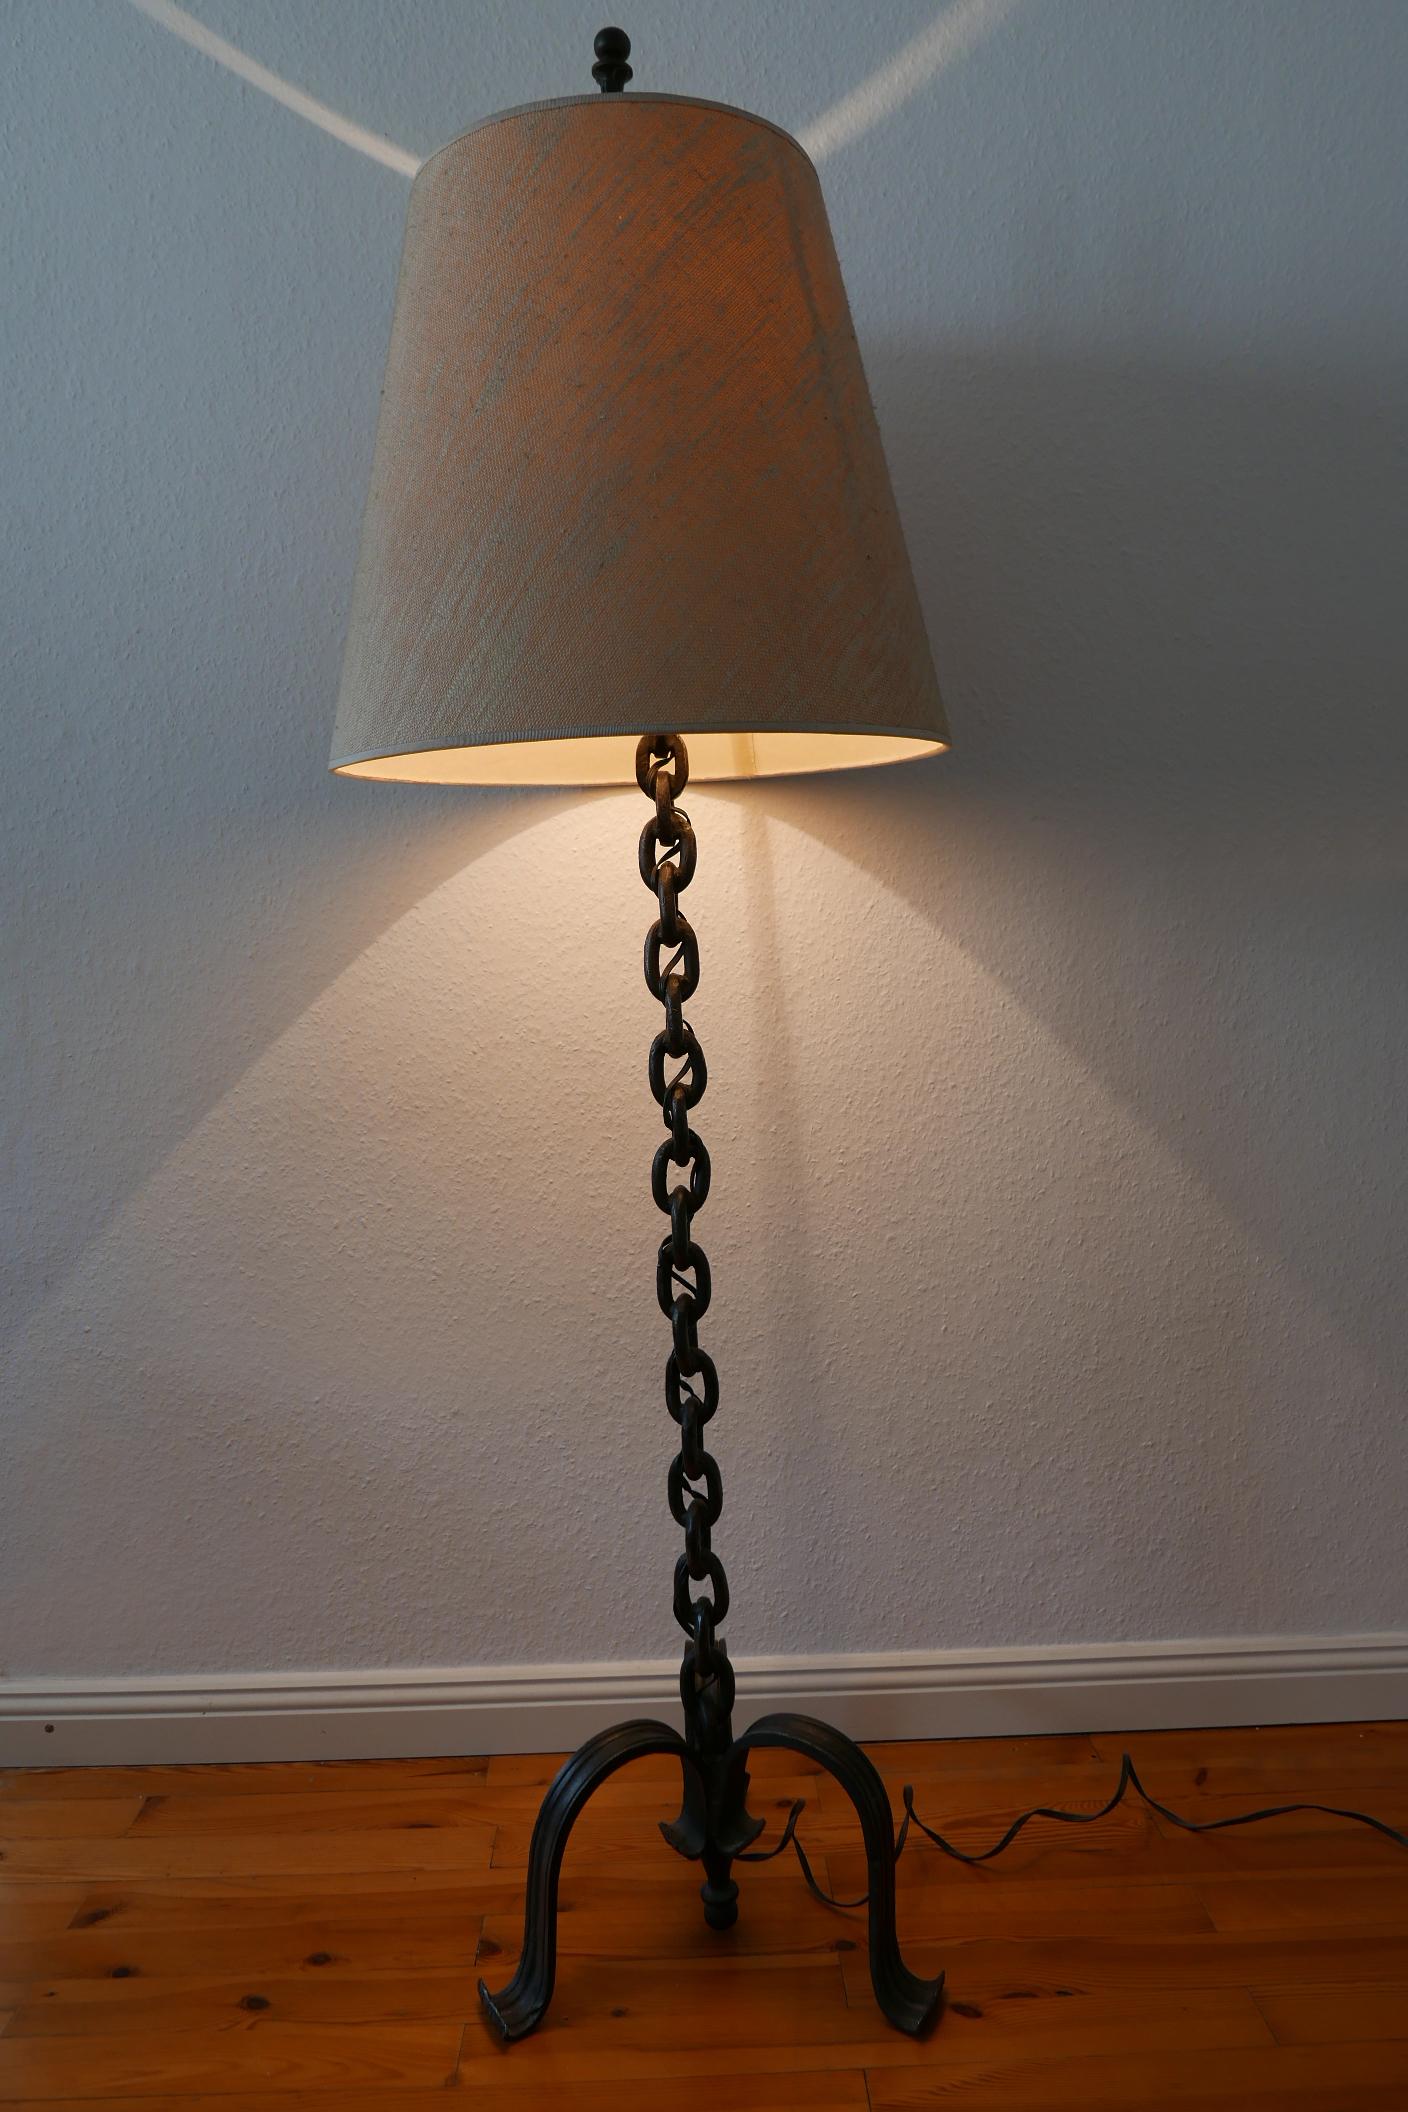 Heavy and decorative Mid-Century Modern wrought iron chain floor lamp in the style of Franz West. Manufactured in Germany, 1960s.

Executed in wrought iron and jute, the floor lamp comes with 1 x E27 / E26 Edison screw fit bulb holder, is with